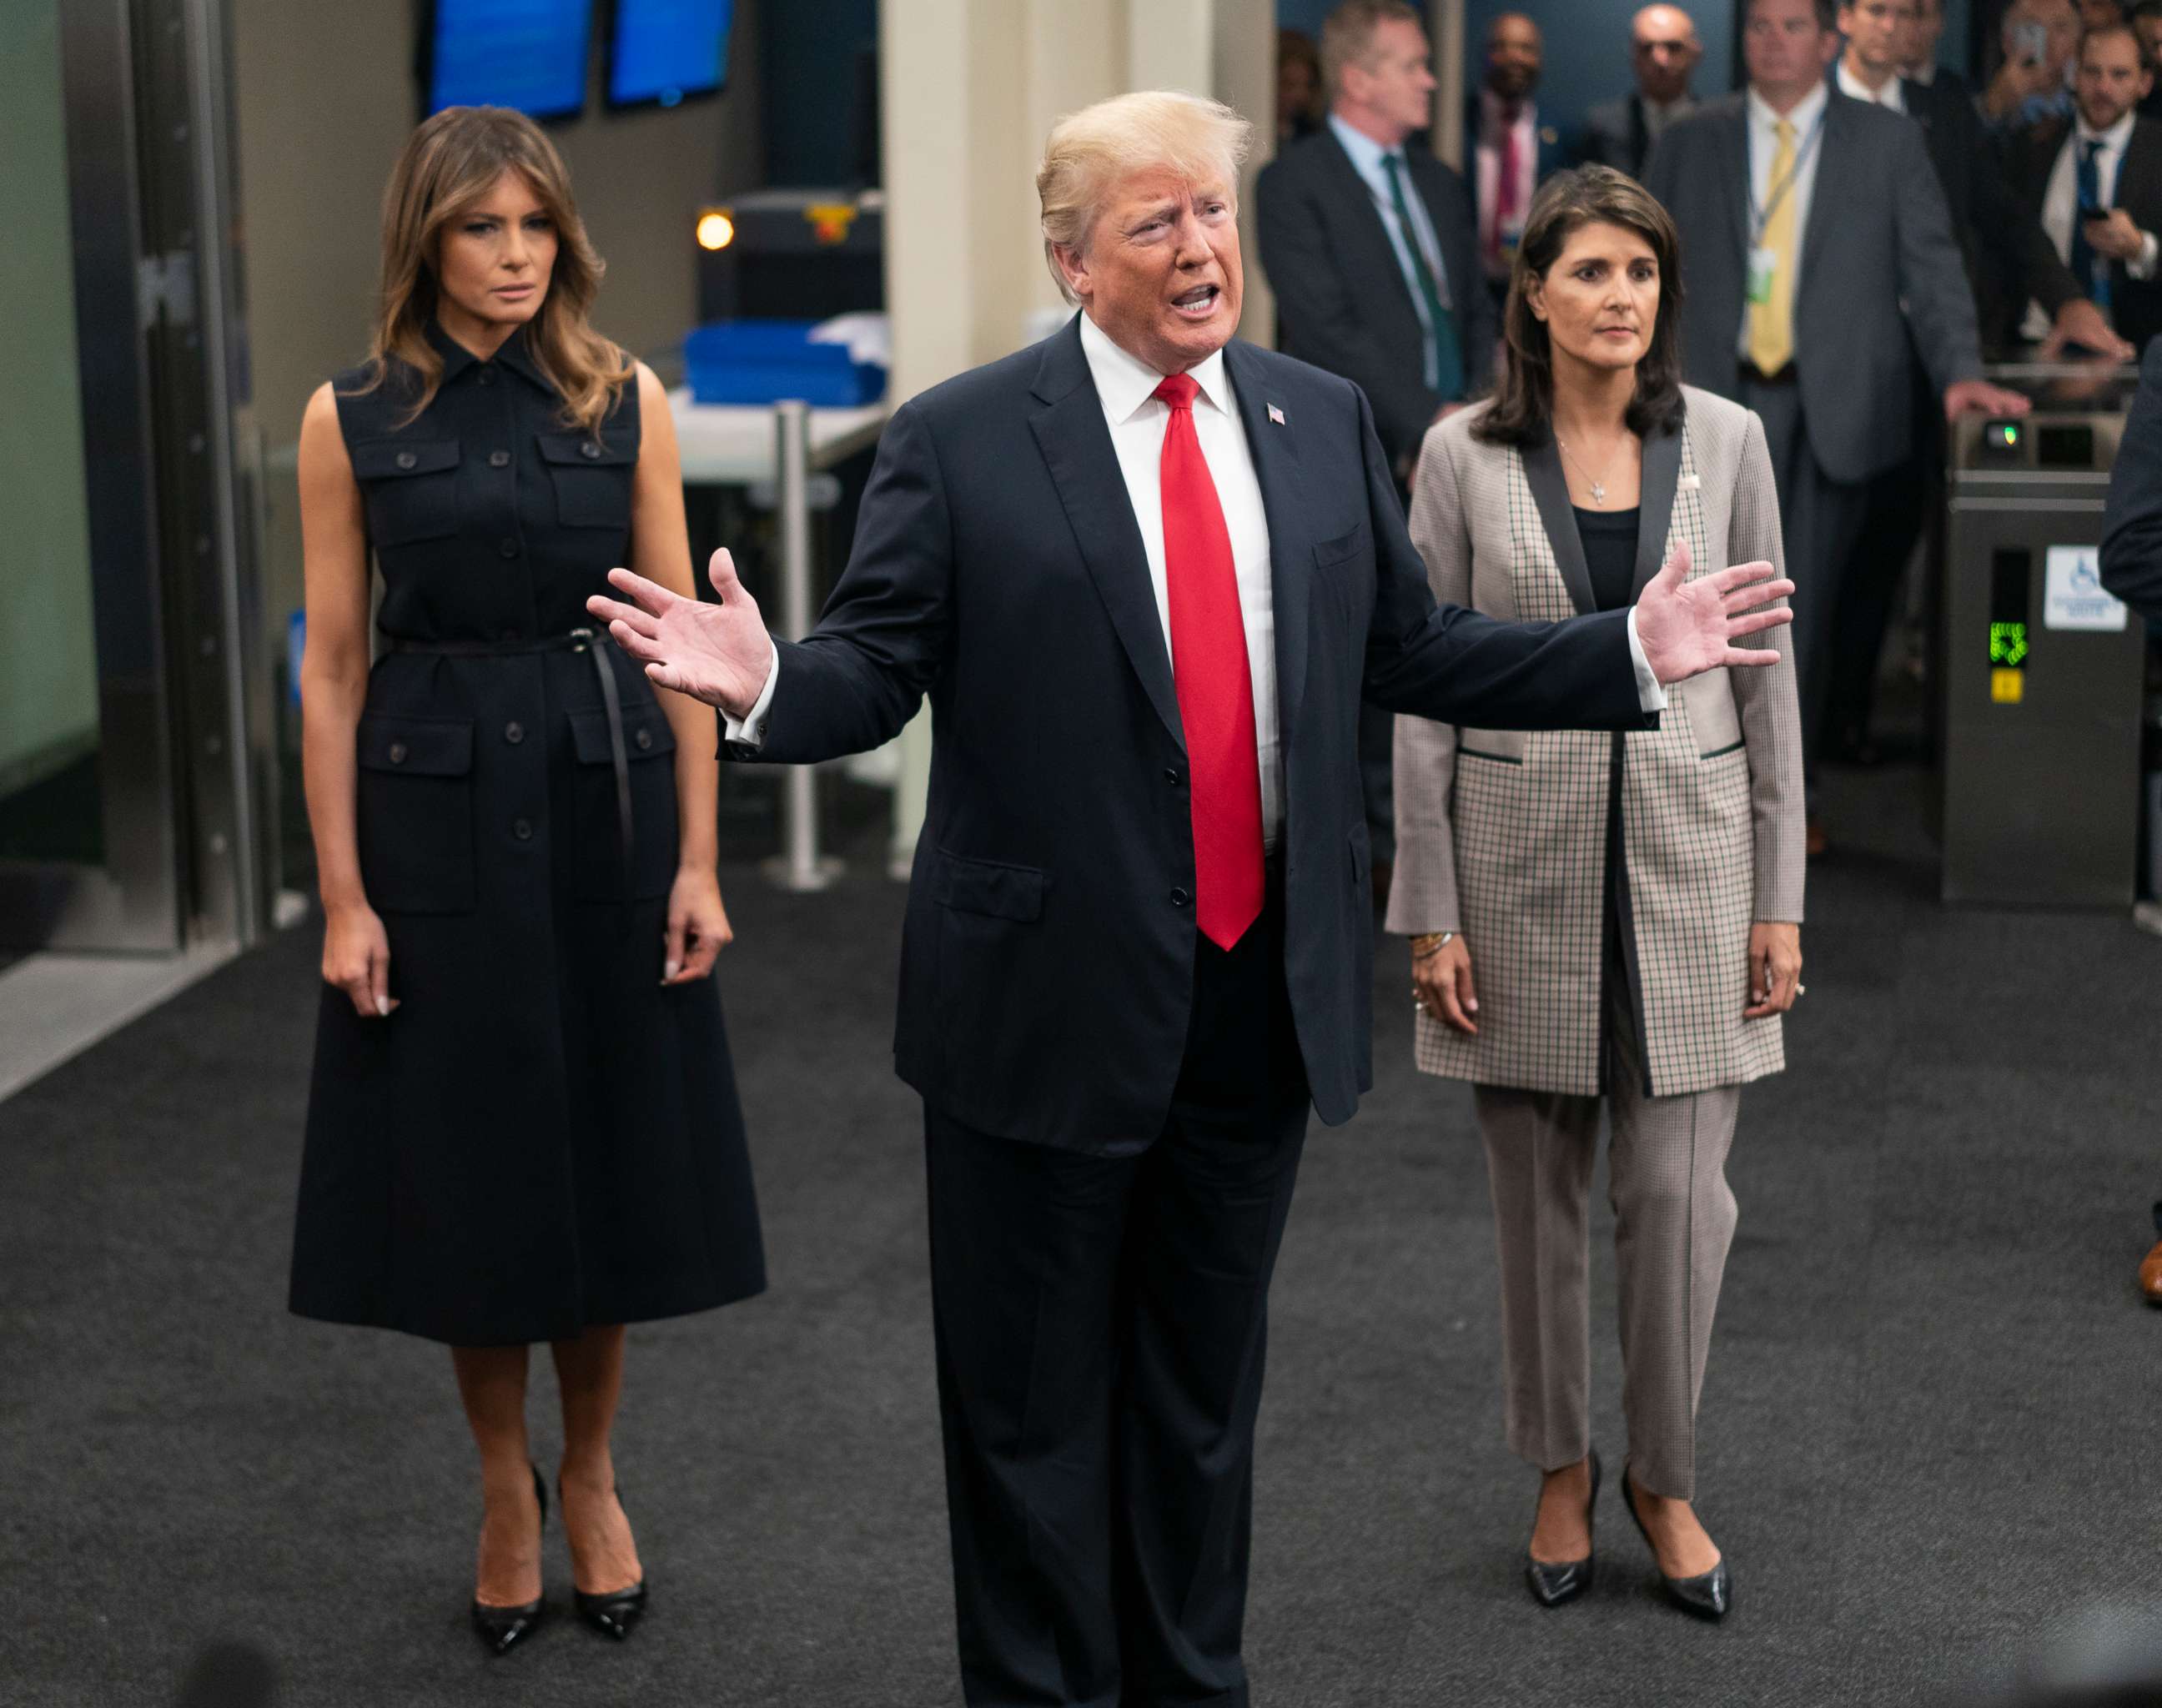 PHOTO: President Donald Trump addresses members of the news media as he arrives with First lady Melania Trump, left, and Nikki Haley, the U.S. ambassador to the United Nations, Sept. 25, 2018.